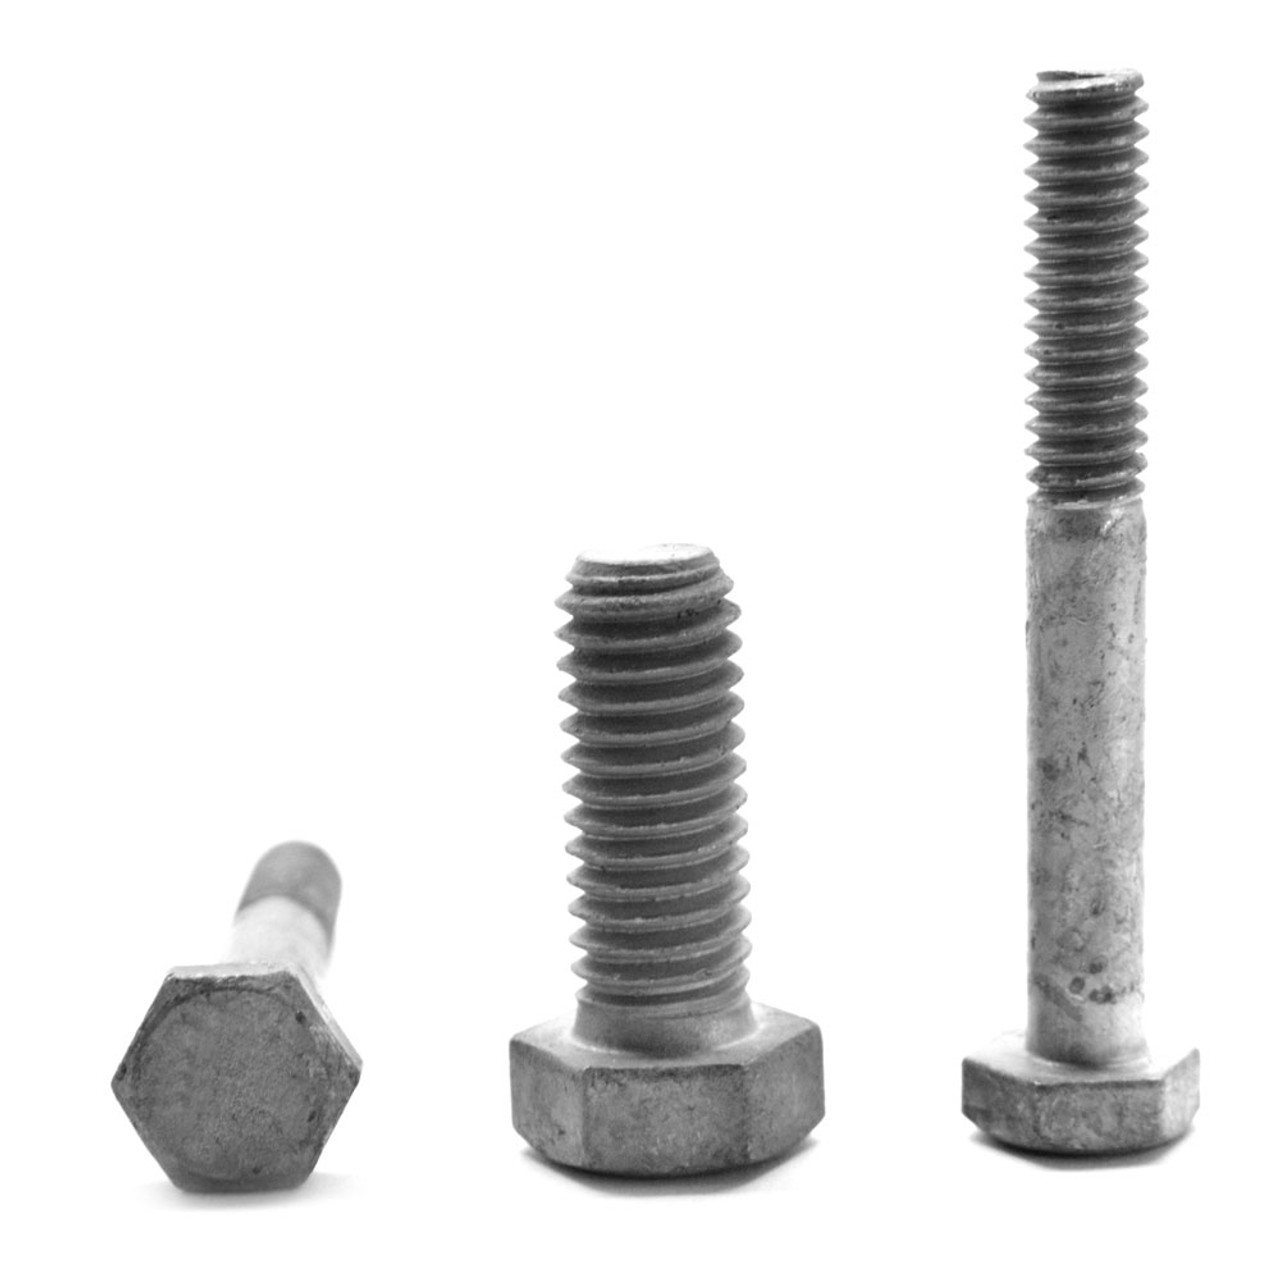 1/2"-13 x 12"6"THD UNDER-SIZED Coarse Thread A307 Grade A Hex Bolt Low Carbon Steel Hot Dip Galvanized